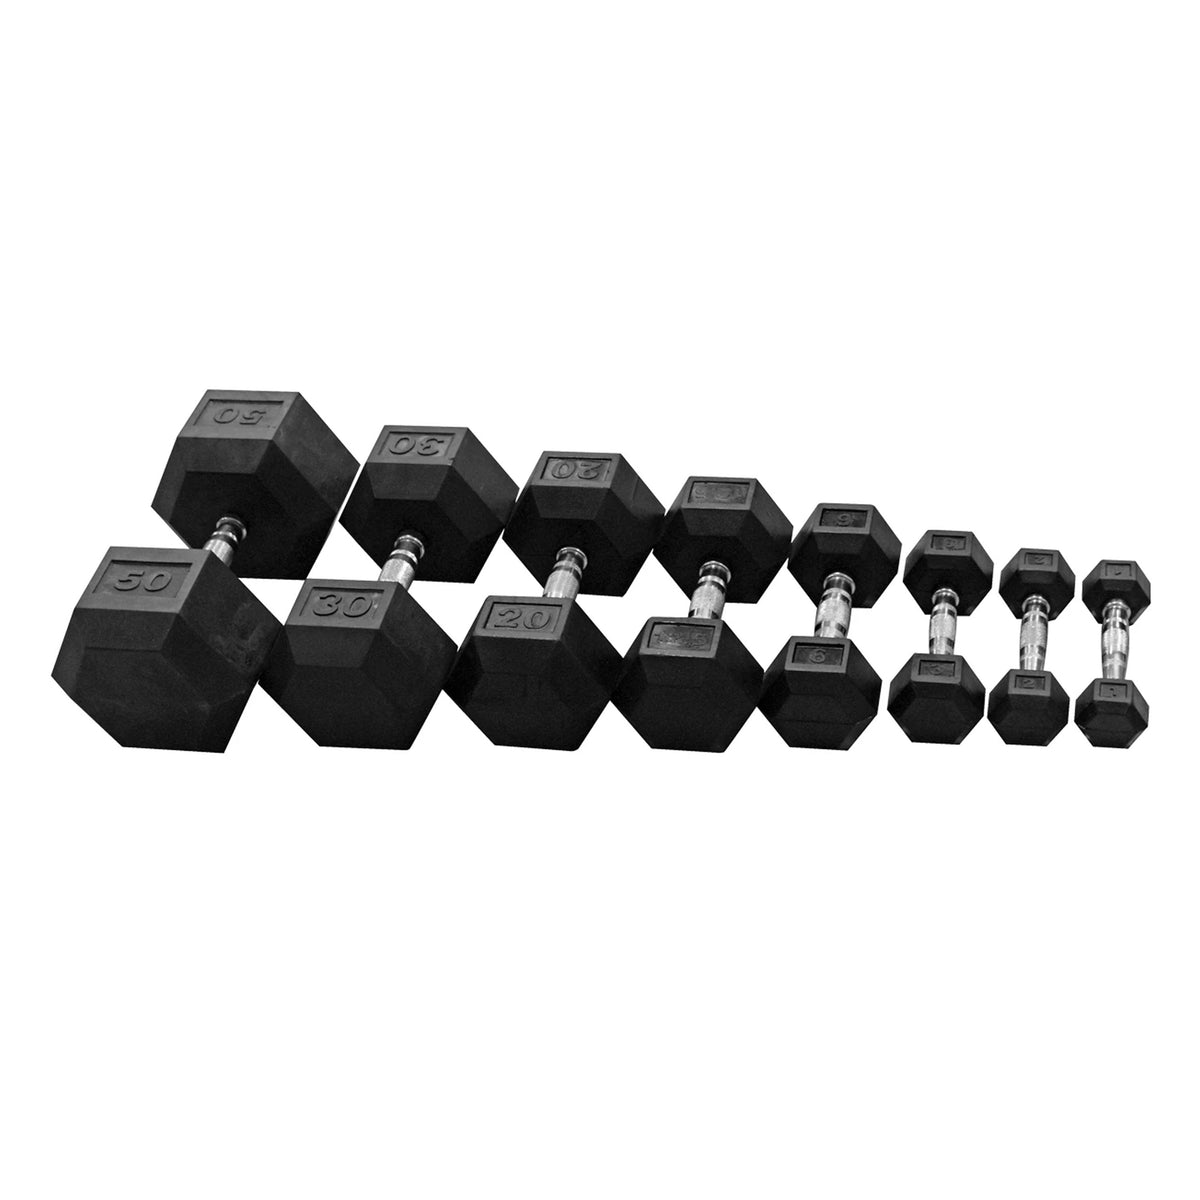 FitWay Equip. Rubber Hex Dumbbell Pair - 20lb